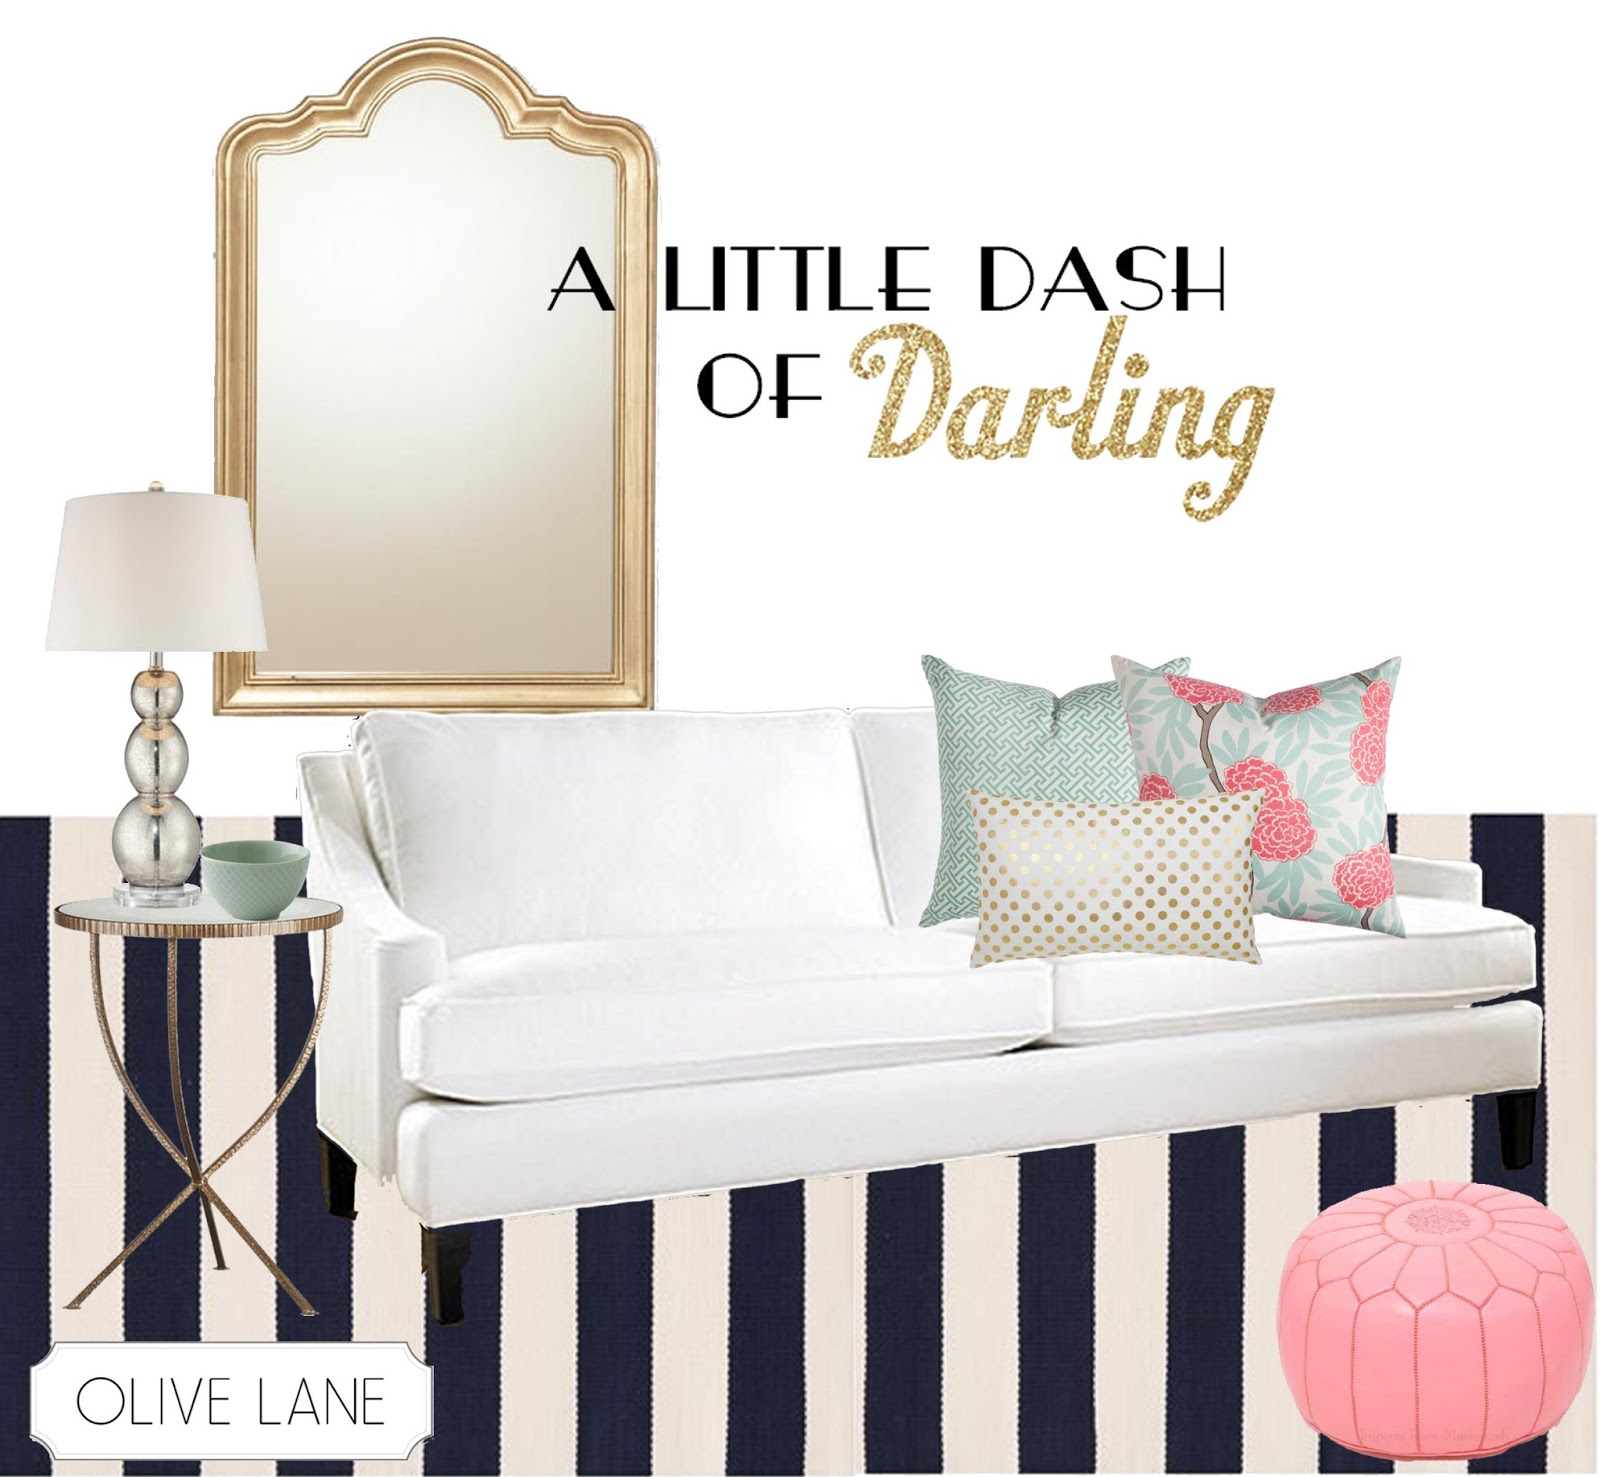 olive lane fashion friday little dash darling jules small accent table crate and barrel west elm textured dip bowl ballard designs manchester sofa long narrow nautical bedroom